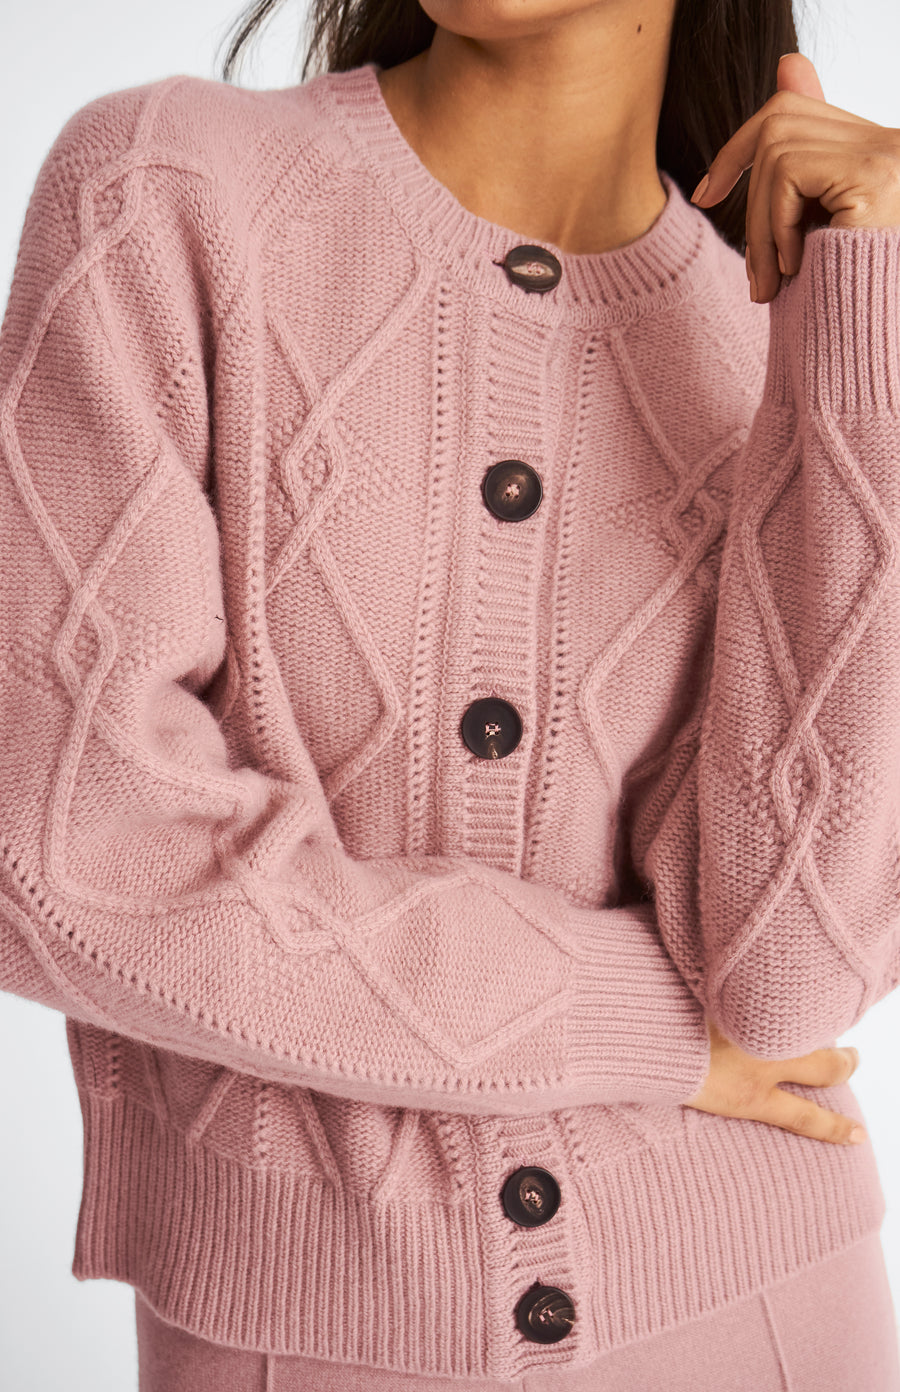 Pringle of Scotland Multi Texture Cashmere blend cardigan in Dusty Pink showing button detail